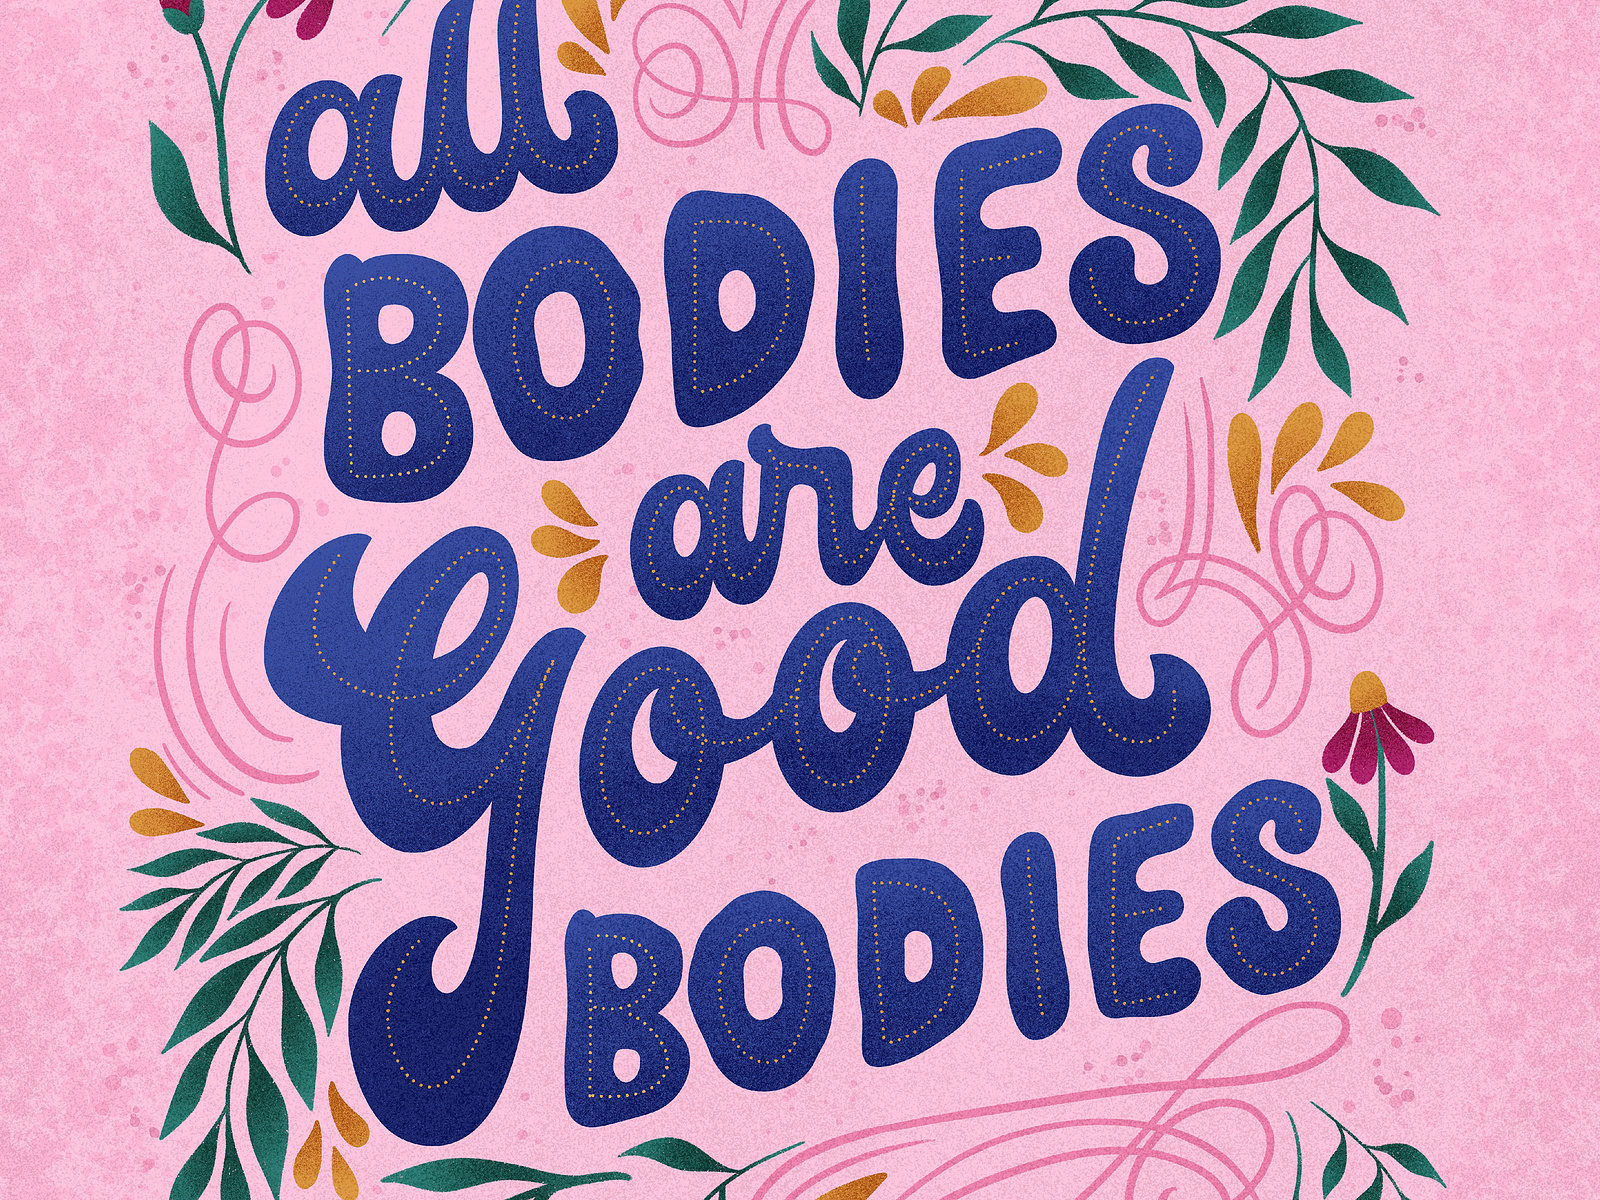 All Bodies Are Good Bodies Lettering By Hannah Pearlman On Dribbble 